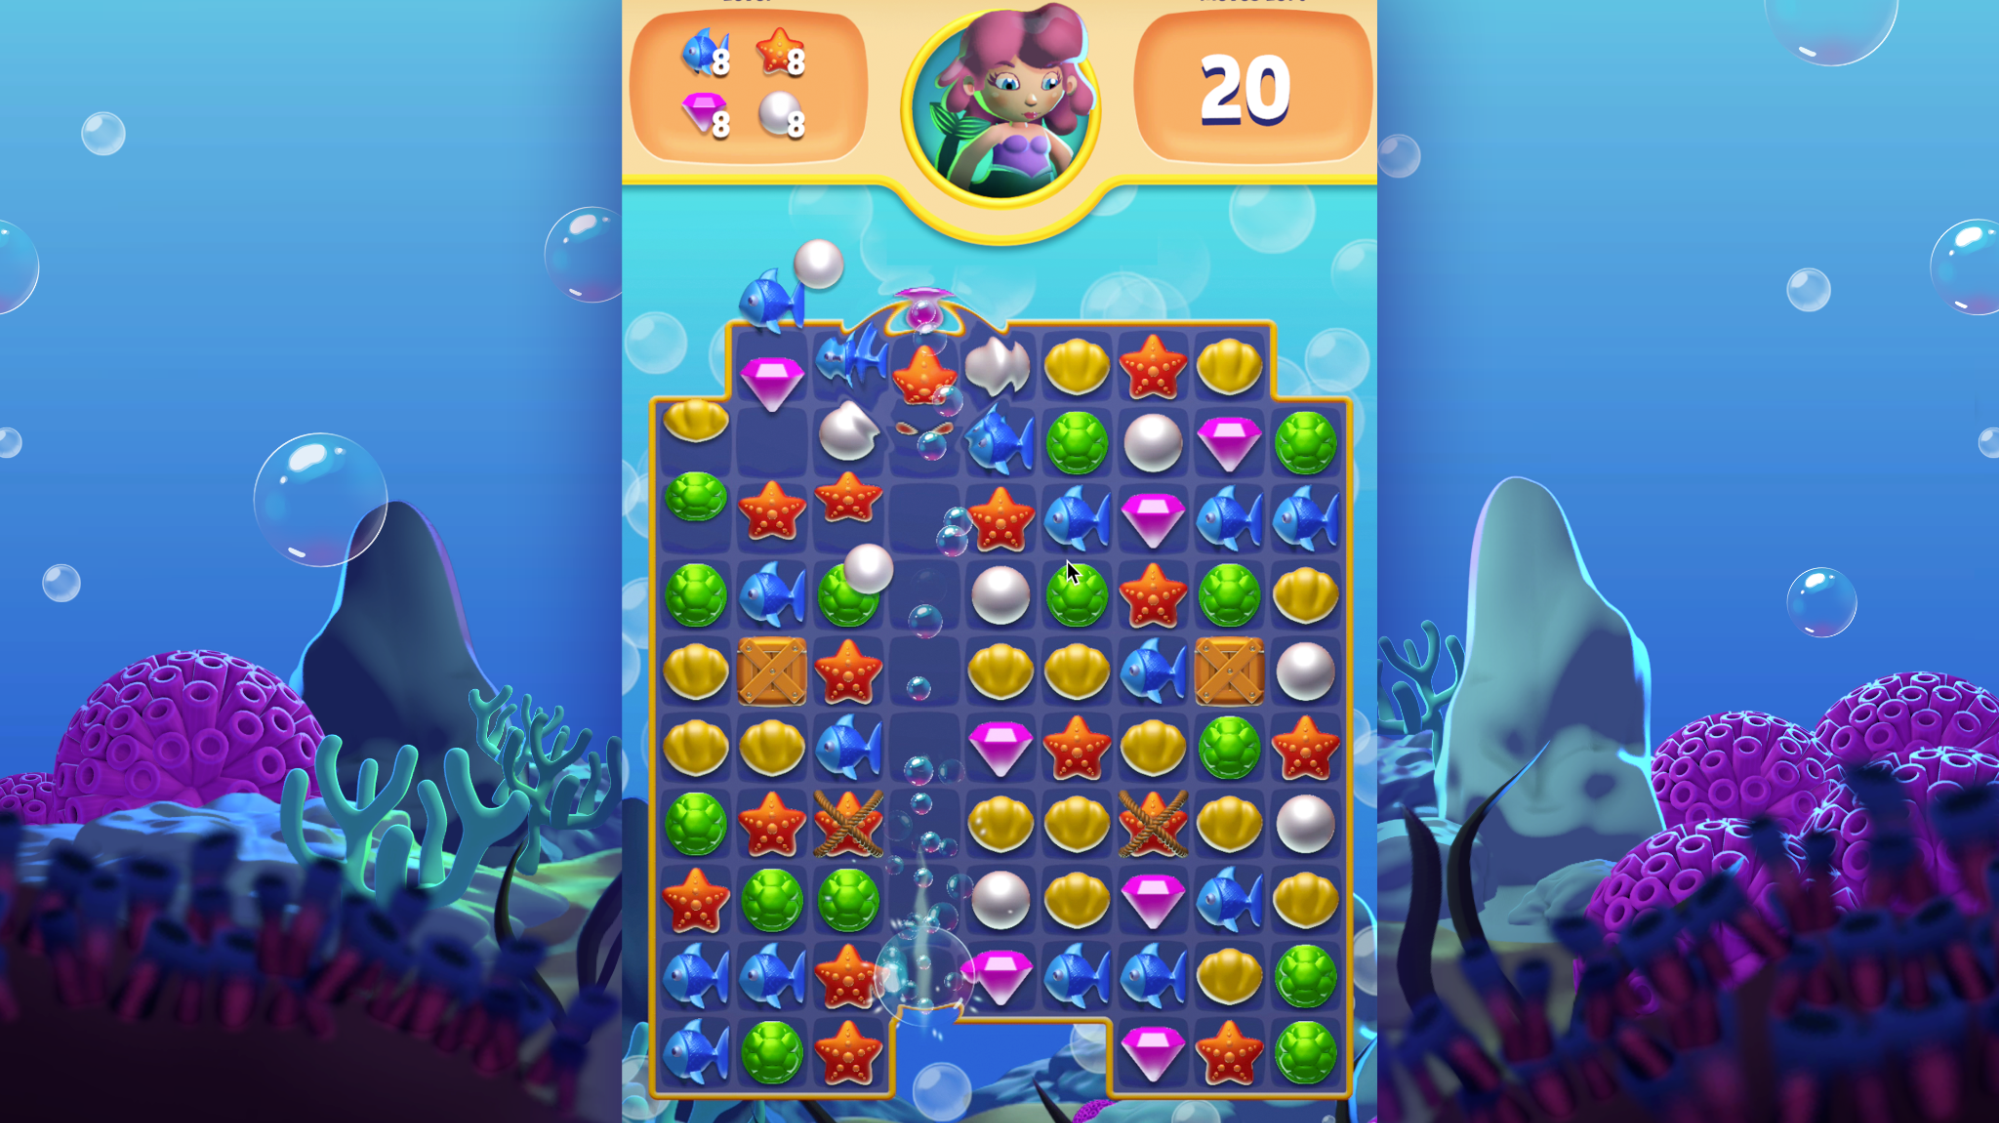 An example of the gameplay in Gem Hunter Match